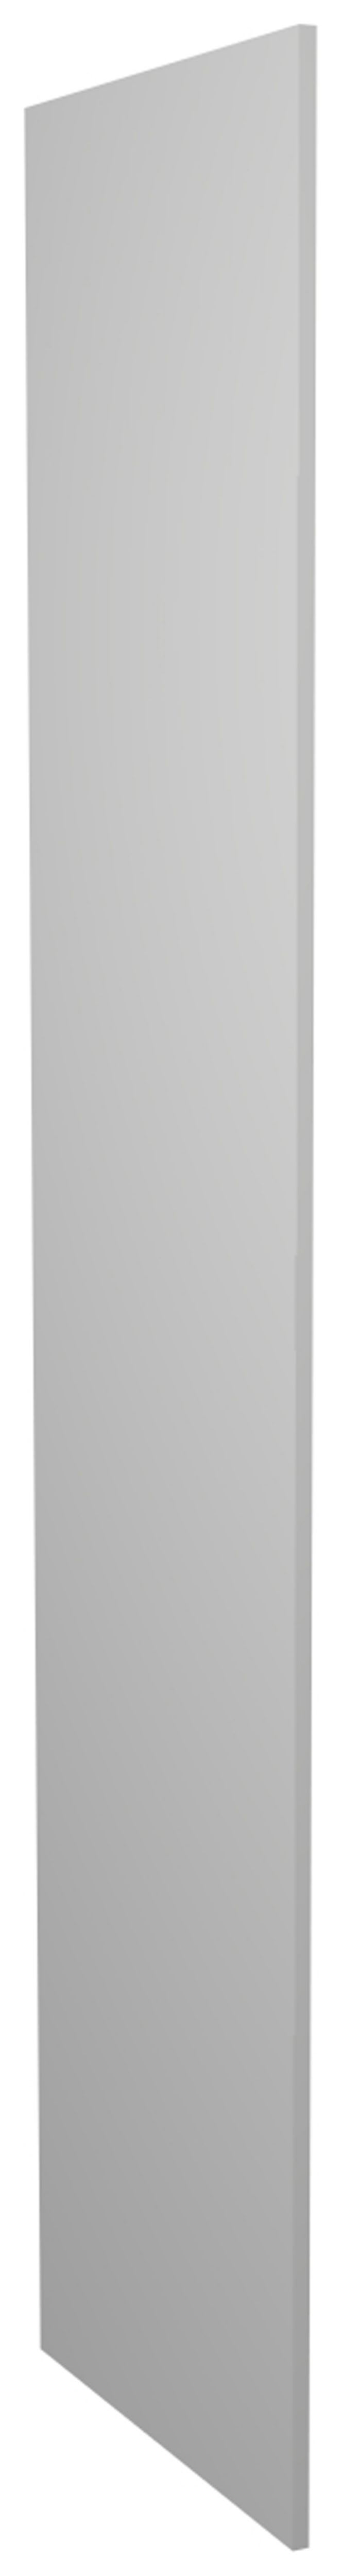 Wickes Hertford Dove Grey Tower Decor End Panel